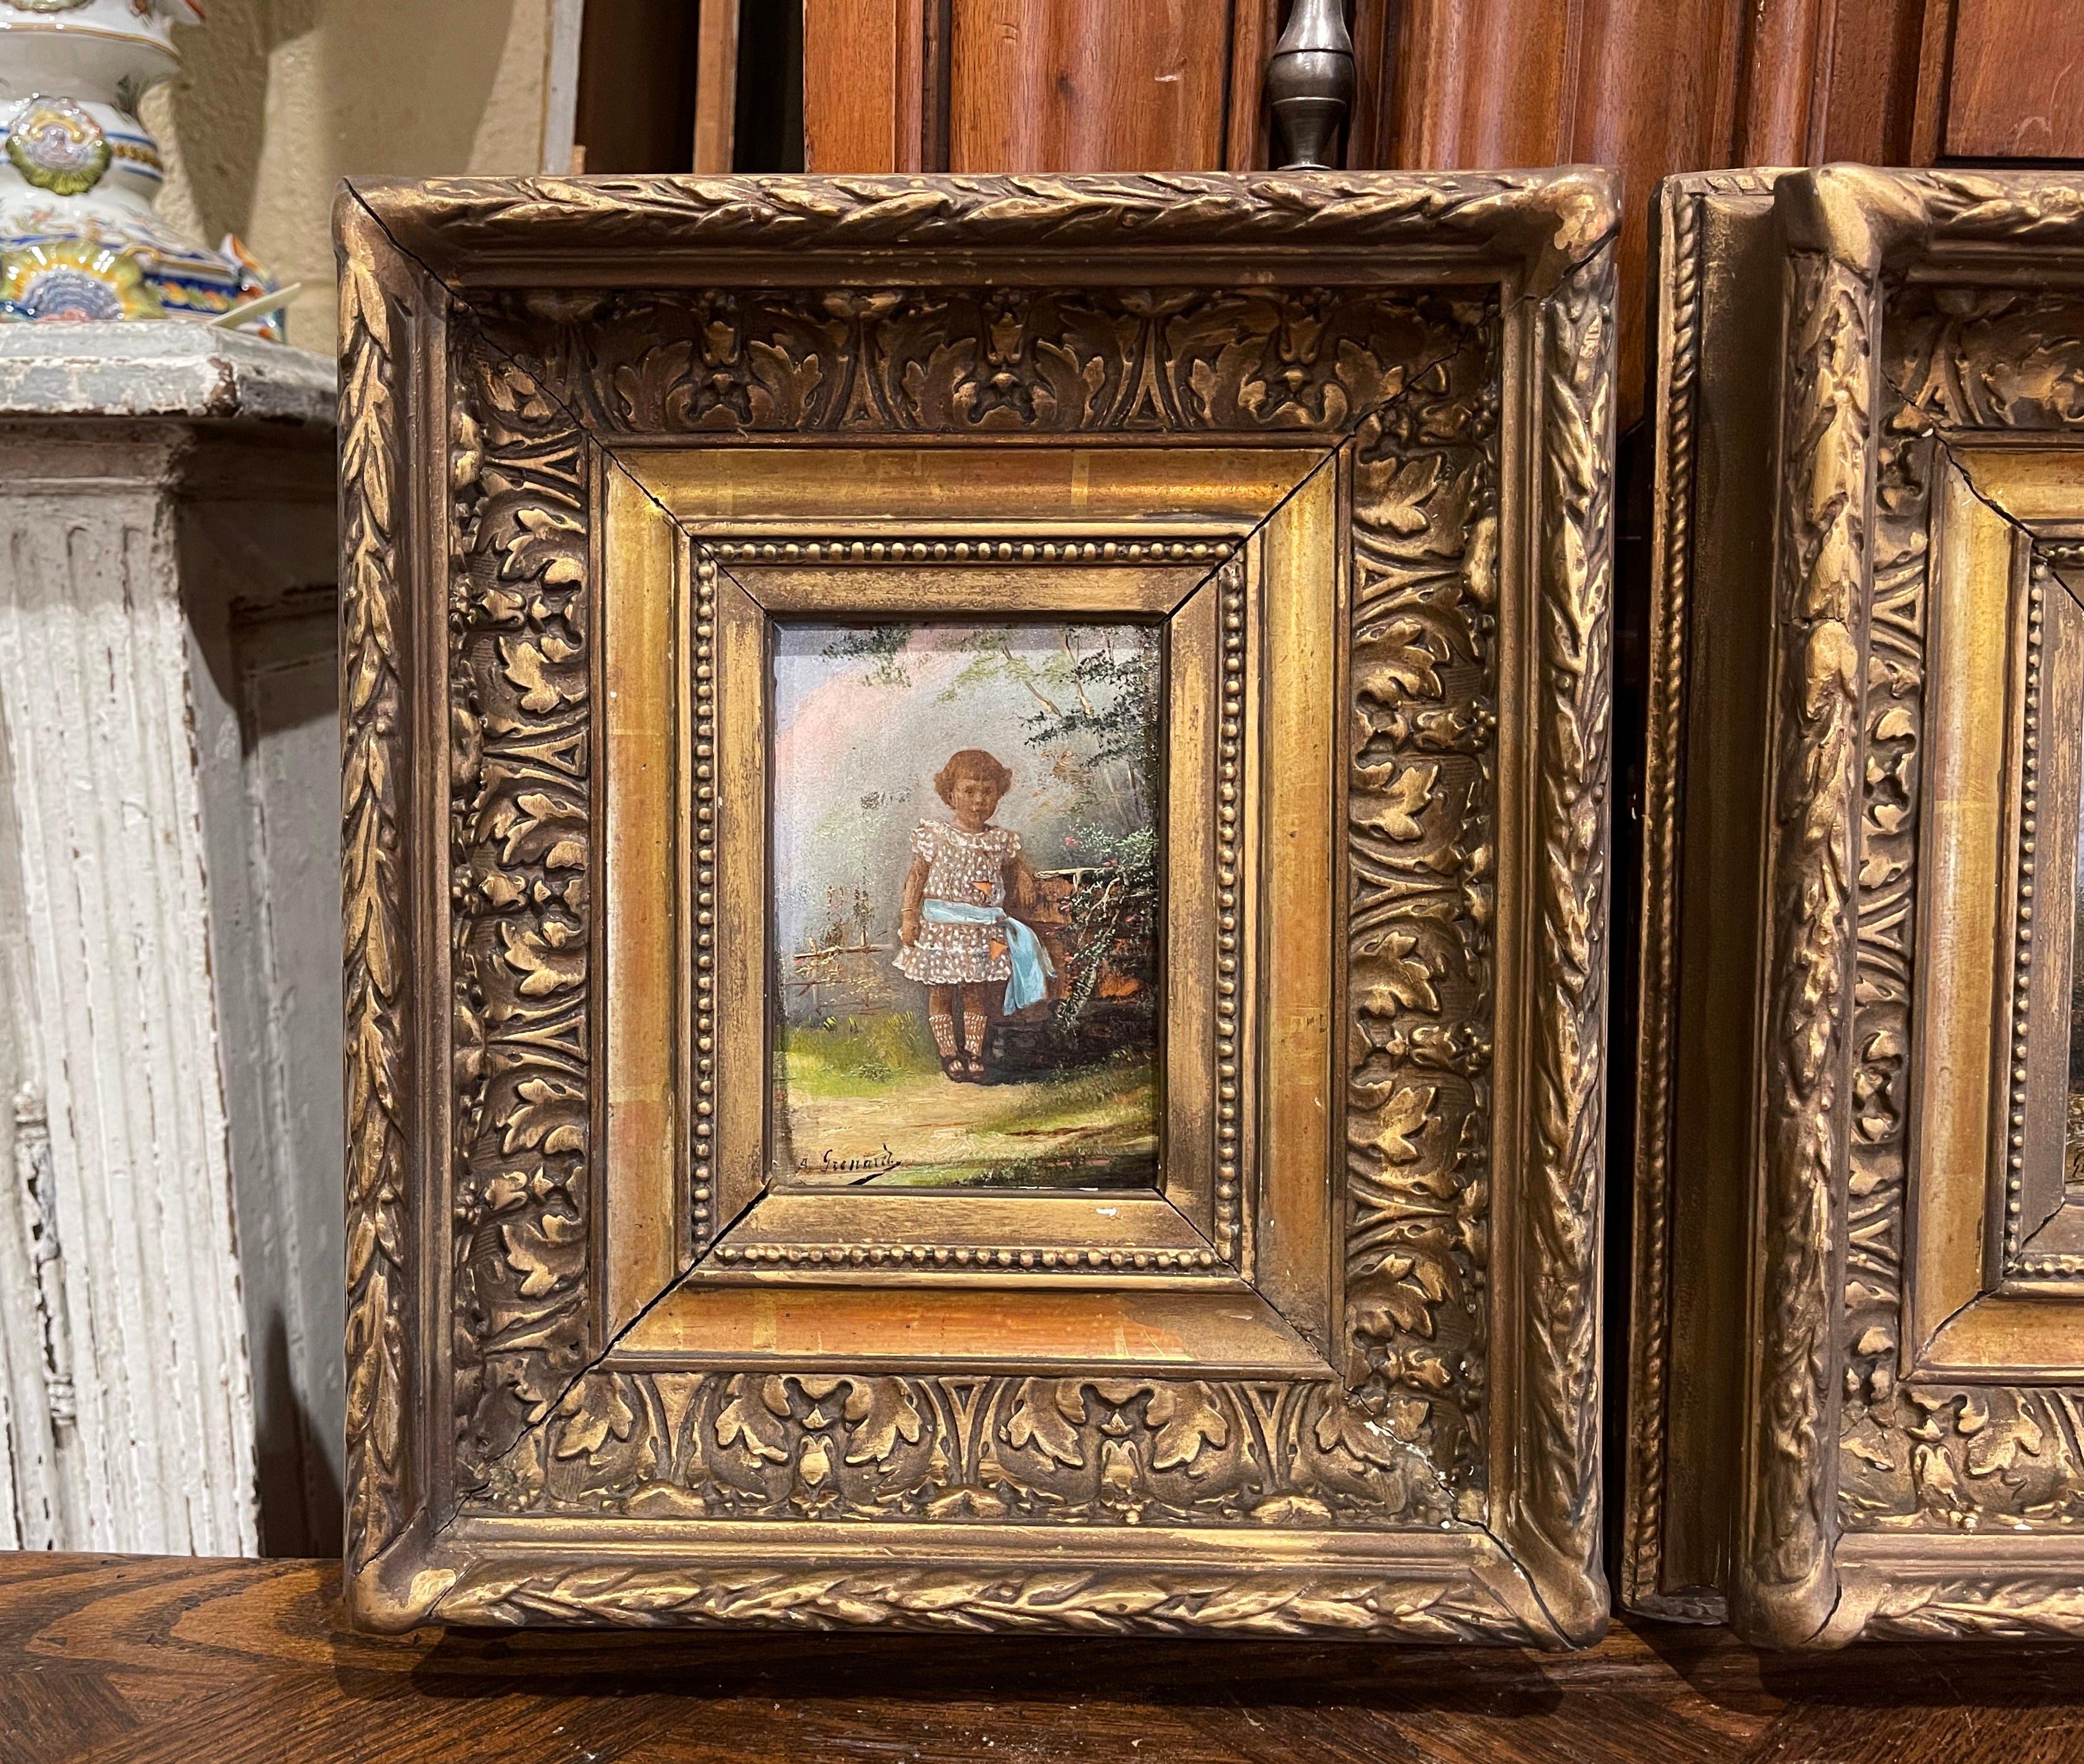 These charming antique paintings were created in France, circa 1870. Set in the original carved gilt frames, each artwork is painted on board and signed by the artist A. Grenard in the lower left corner. Each composition depicts two children in 19th